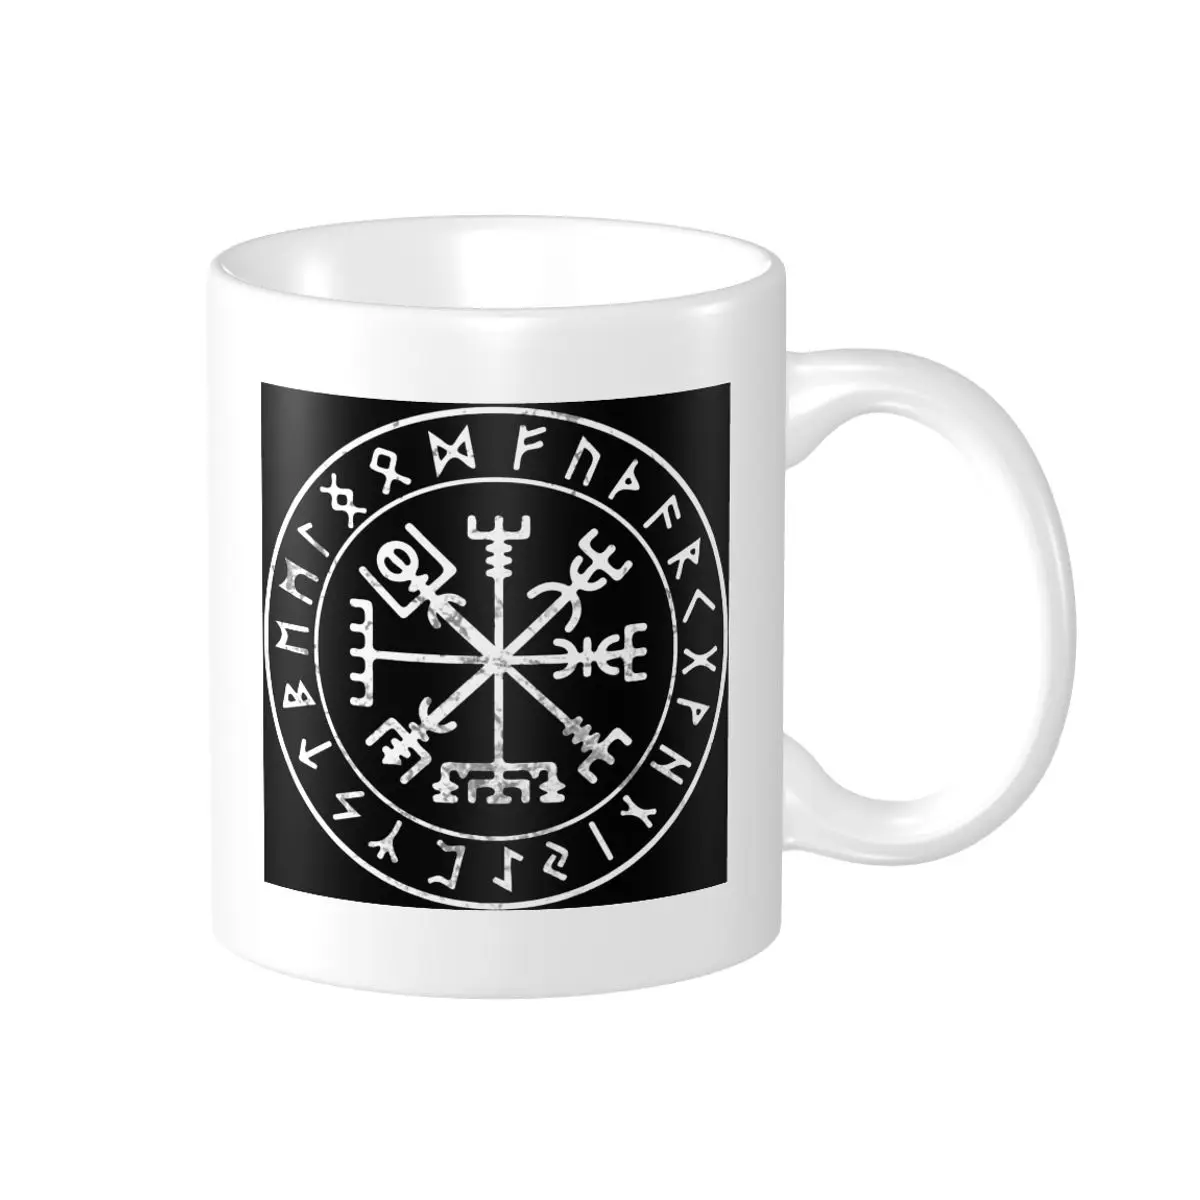 

Promo Viking Compass Vikings Mugs Novelty Cups CUPS Print Humor Graphic R339 multi-function cups